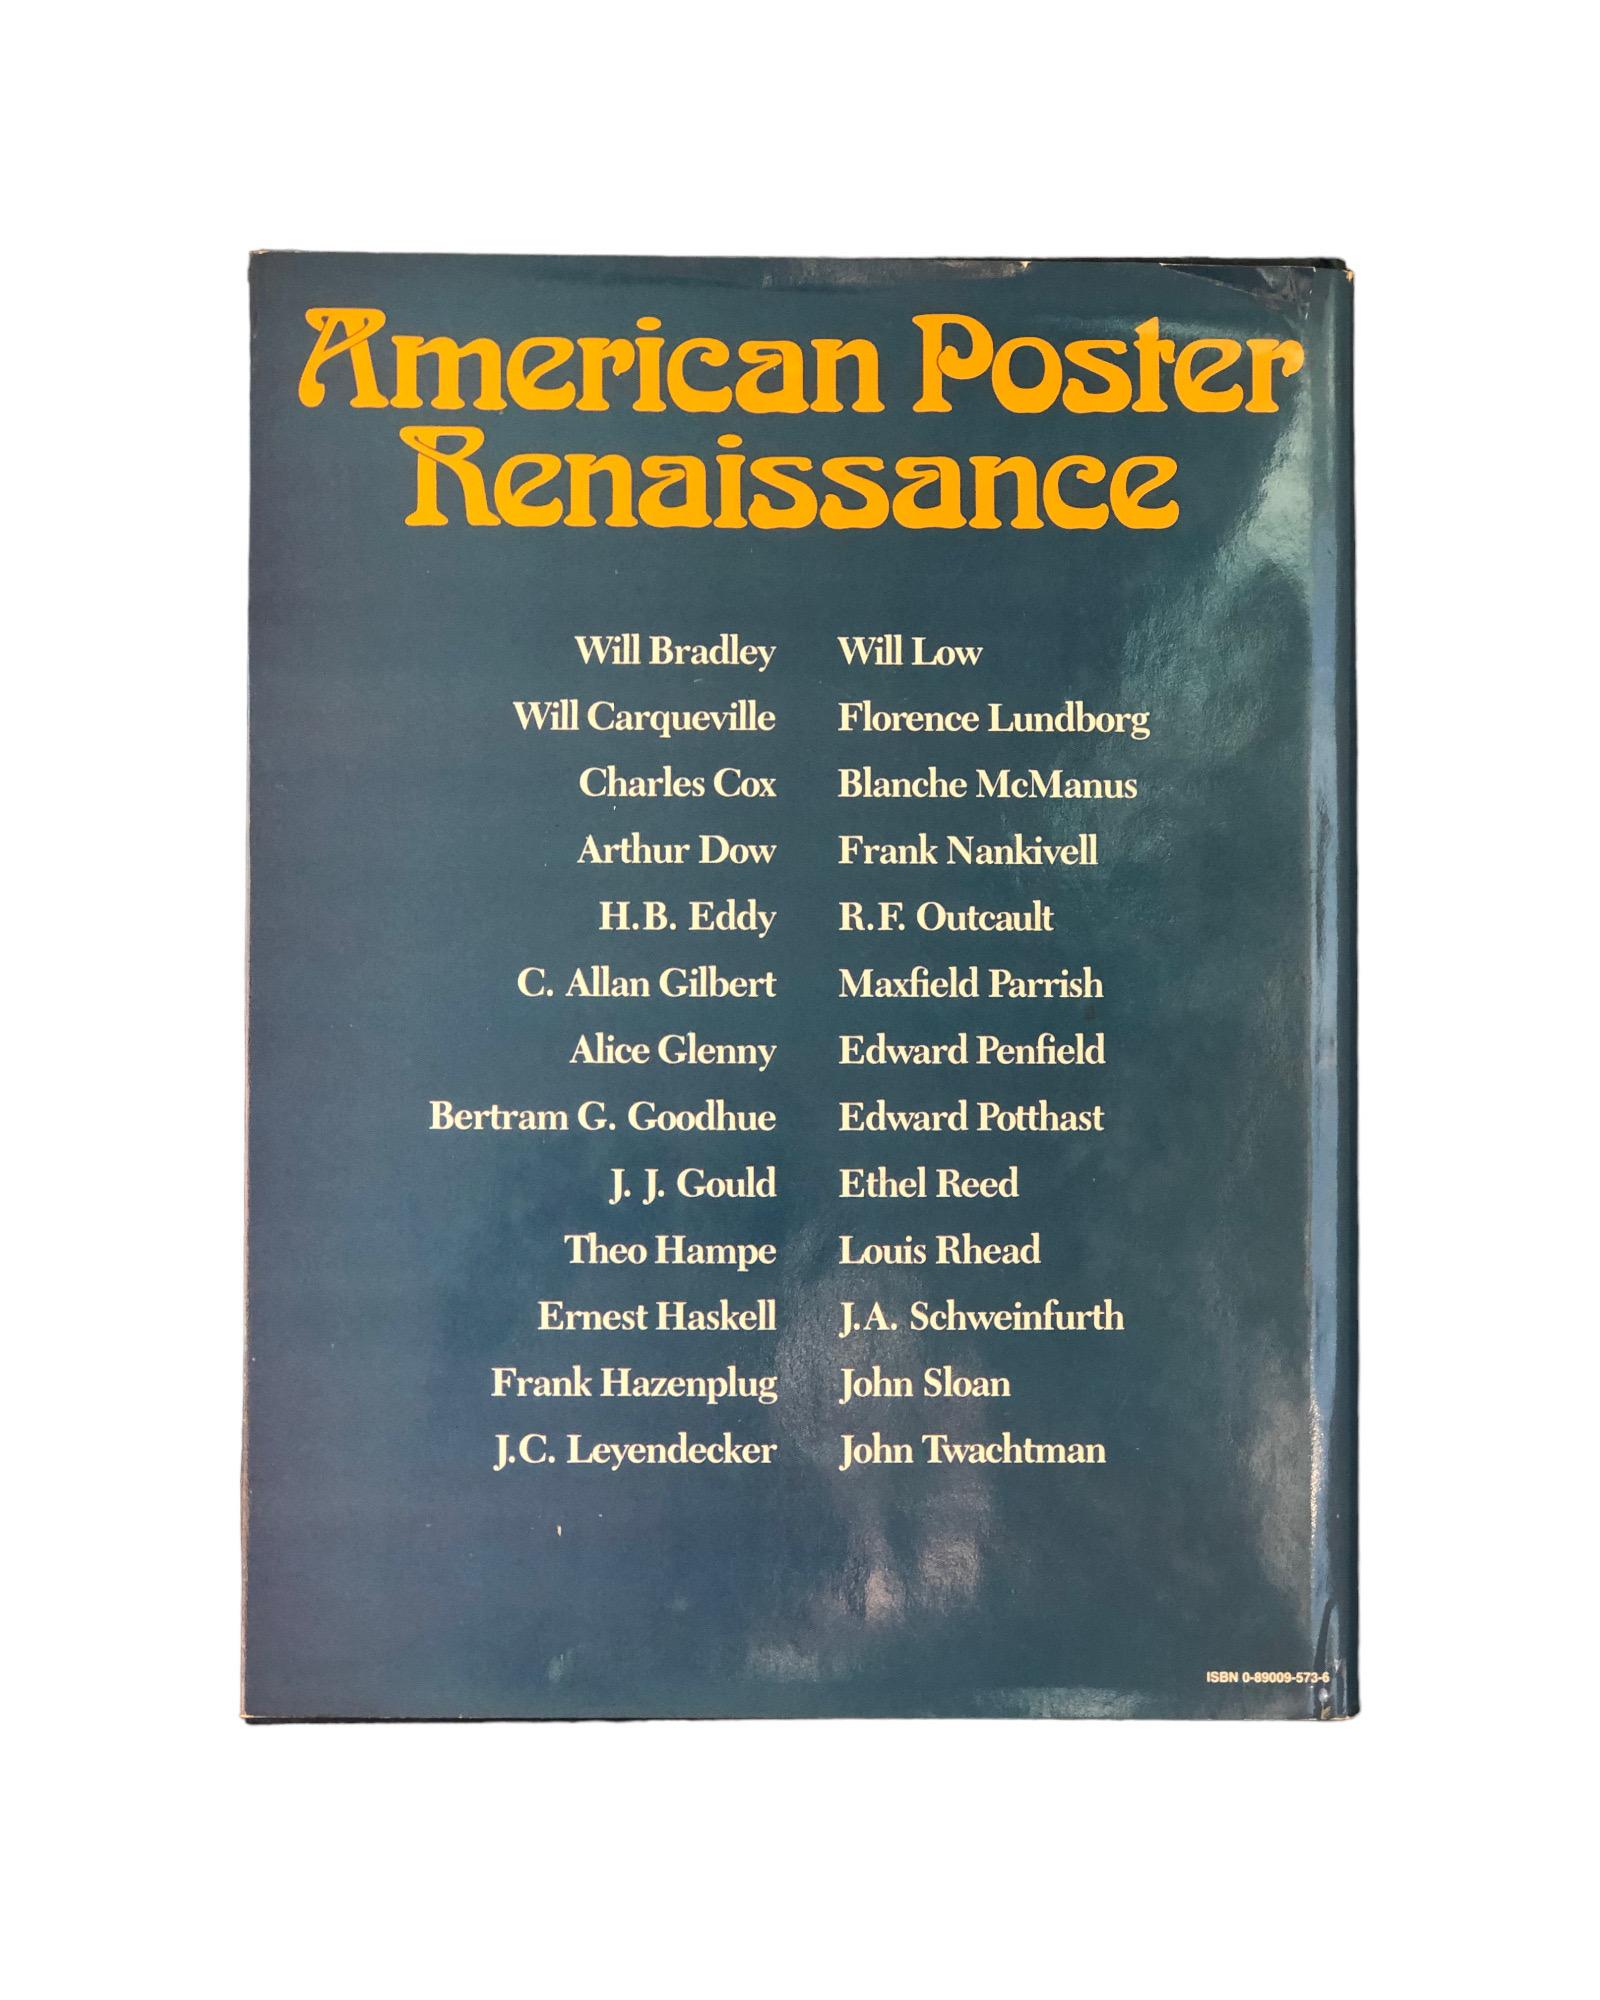 American Poster Renaissance, The Great Age of Poster Design, 1890-1900 by Victor Margolin. Hardcover book with dustjacket. Stated first printing, published in 1975 by Castle Books. 224 pages, 175 black and white illustrations, 48 full color plates.